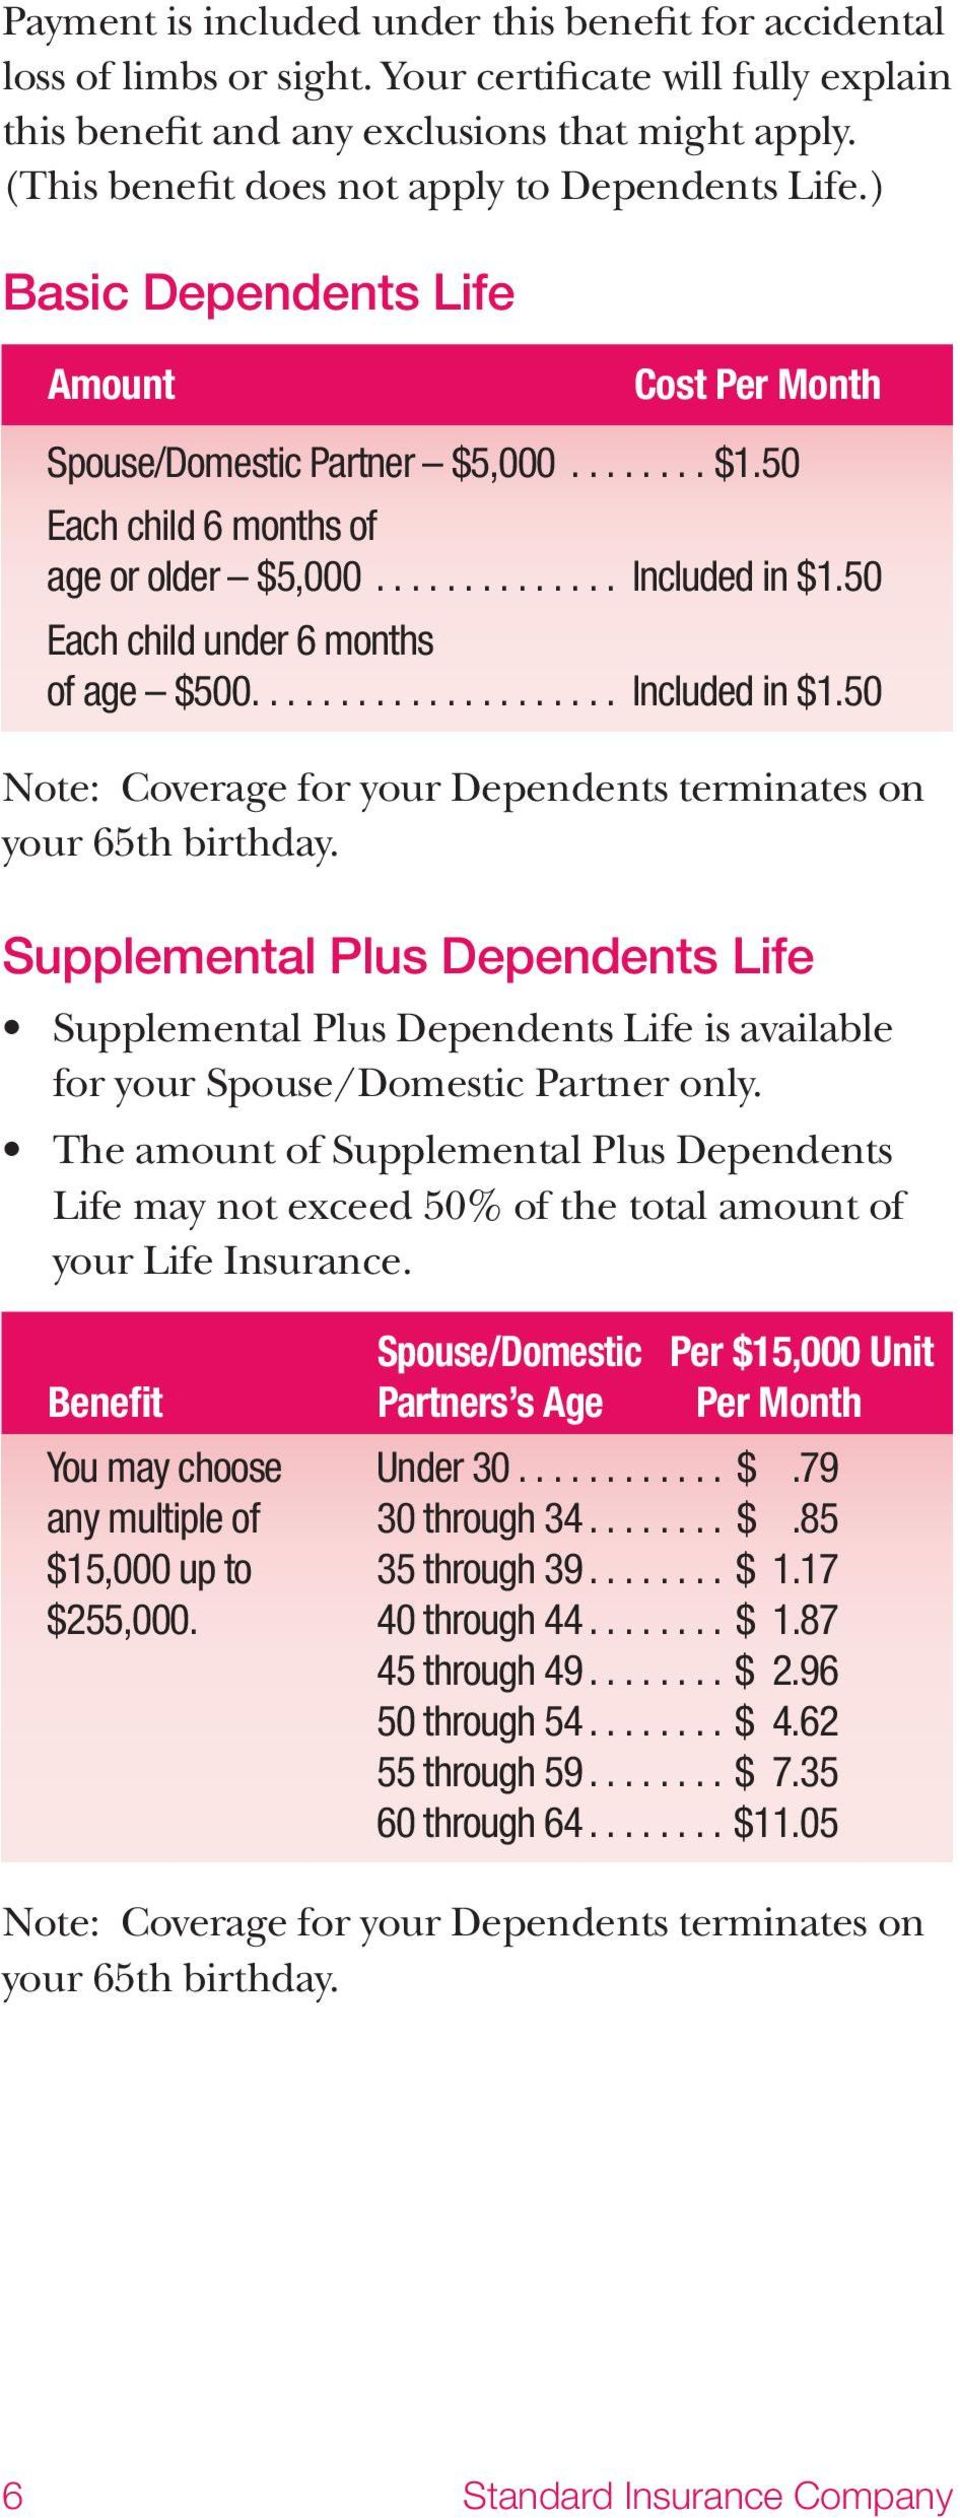 50 Each child under 6 months of age $500..................... Included in $1.50 Note: Coverage for your Dependents terminates on your 65th birthday.